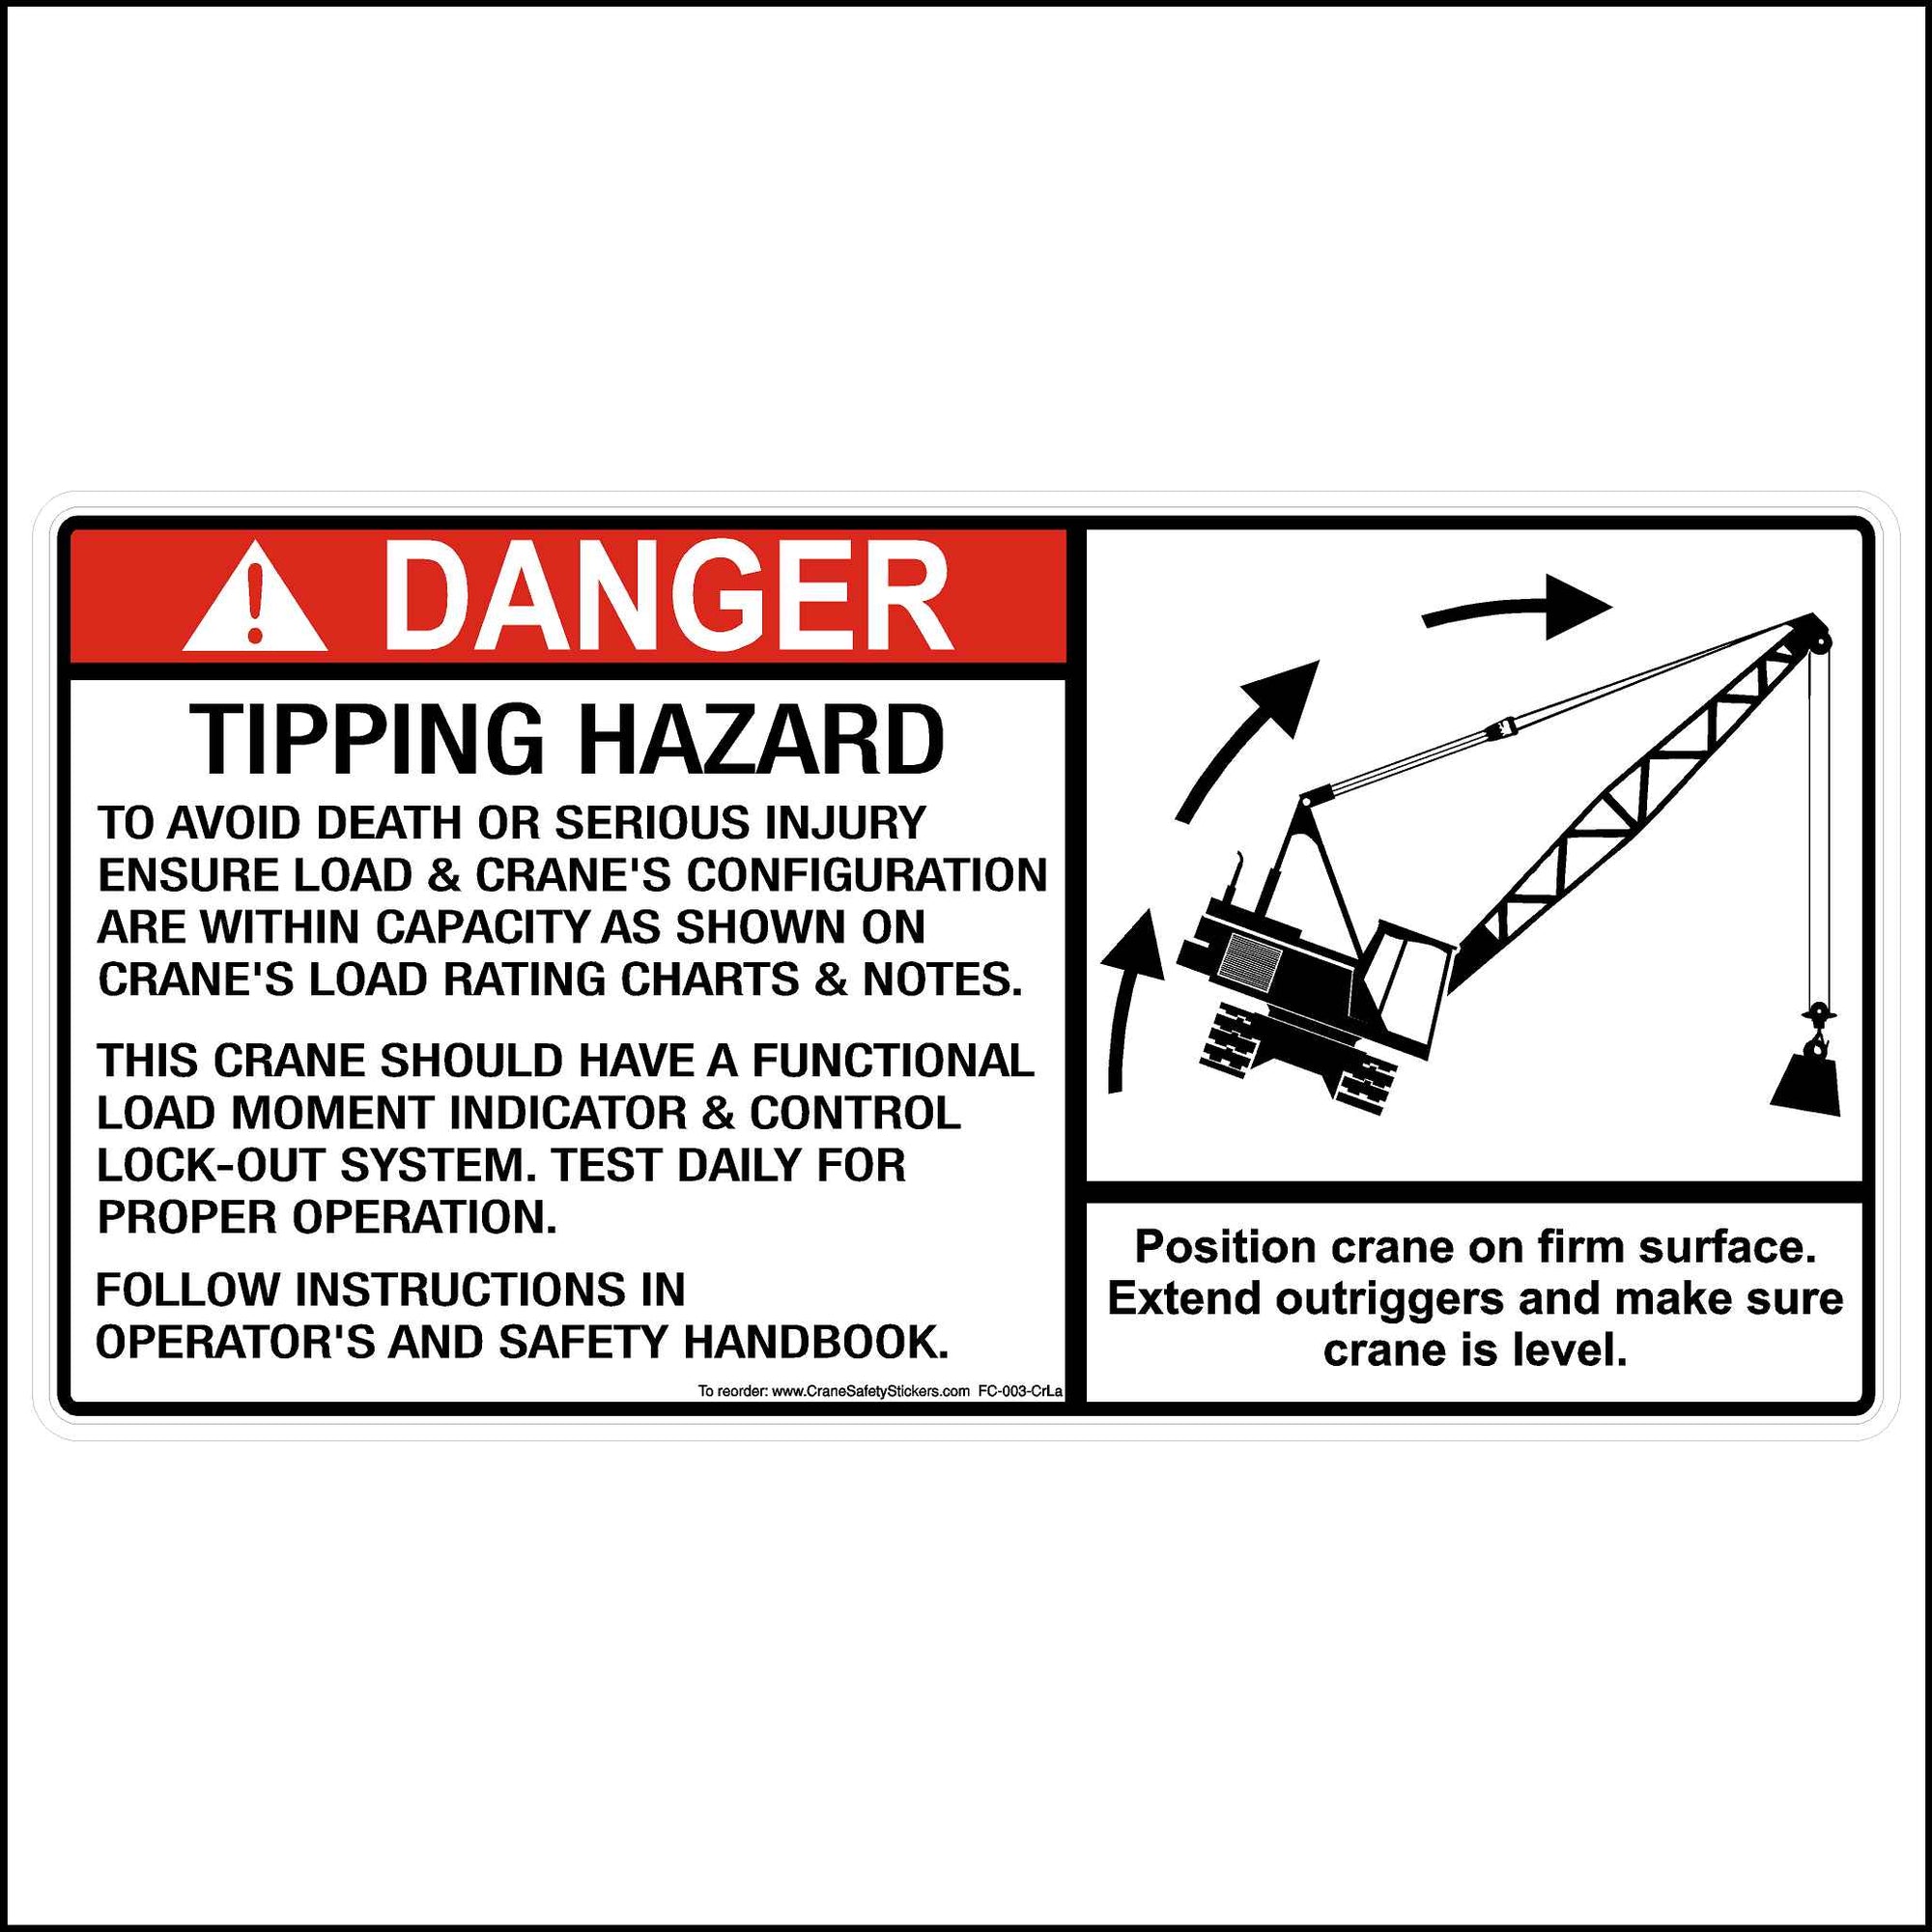 crawler crane tipping safety decal printed with.  DANGER Tipping Hazard. TO AVOID DEATH OR SERIOUS INJURY ENSURE LOAD & CRANE'S CONFIGURATION ARE WITHIN CAPACITY AS SHOWN ON CRANE'S LOAD RATING CHARTS & NOTES.  THIS CRANE SHOULD HAVE A FUNCTIONAL LOAD MOMENT INDICATOR & CONTROL LOCK-OUT SYSTEM. TEST DAILY FOR PROPER OPERATION.  FOLLOW INSTRUCTIONS IN OPERATORS AND SAFETY HANDBOOK.  Position crane on firm surface. Extend outriggers and make sure crane is level.